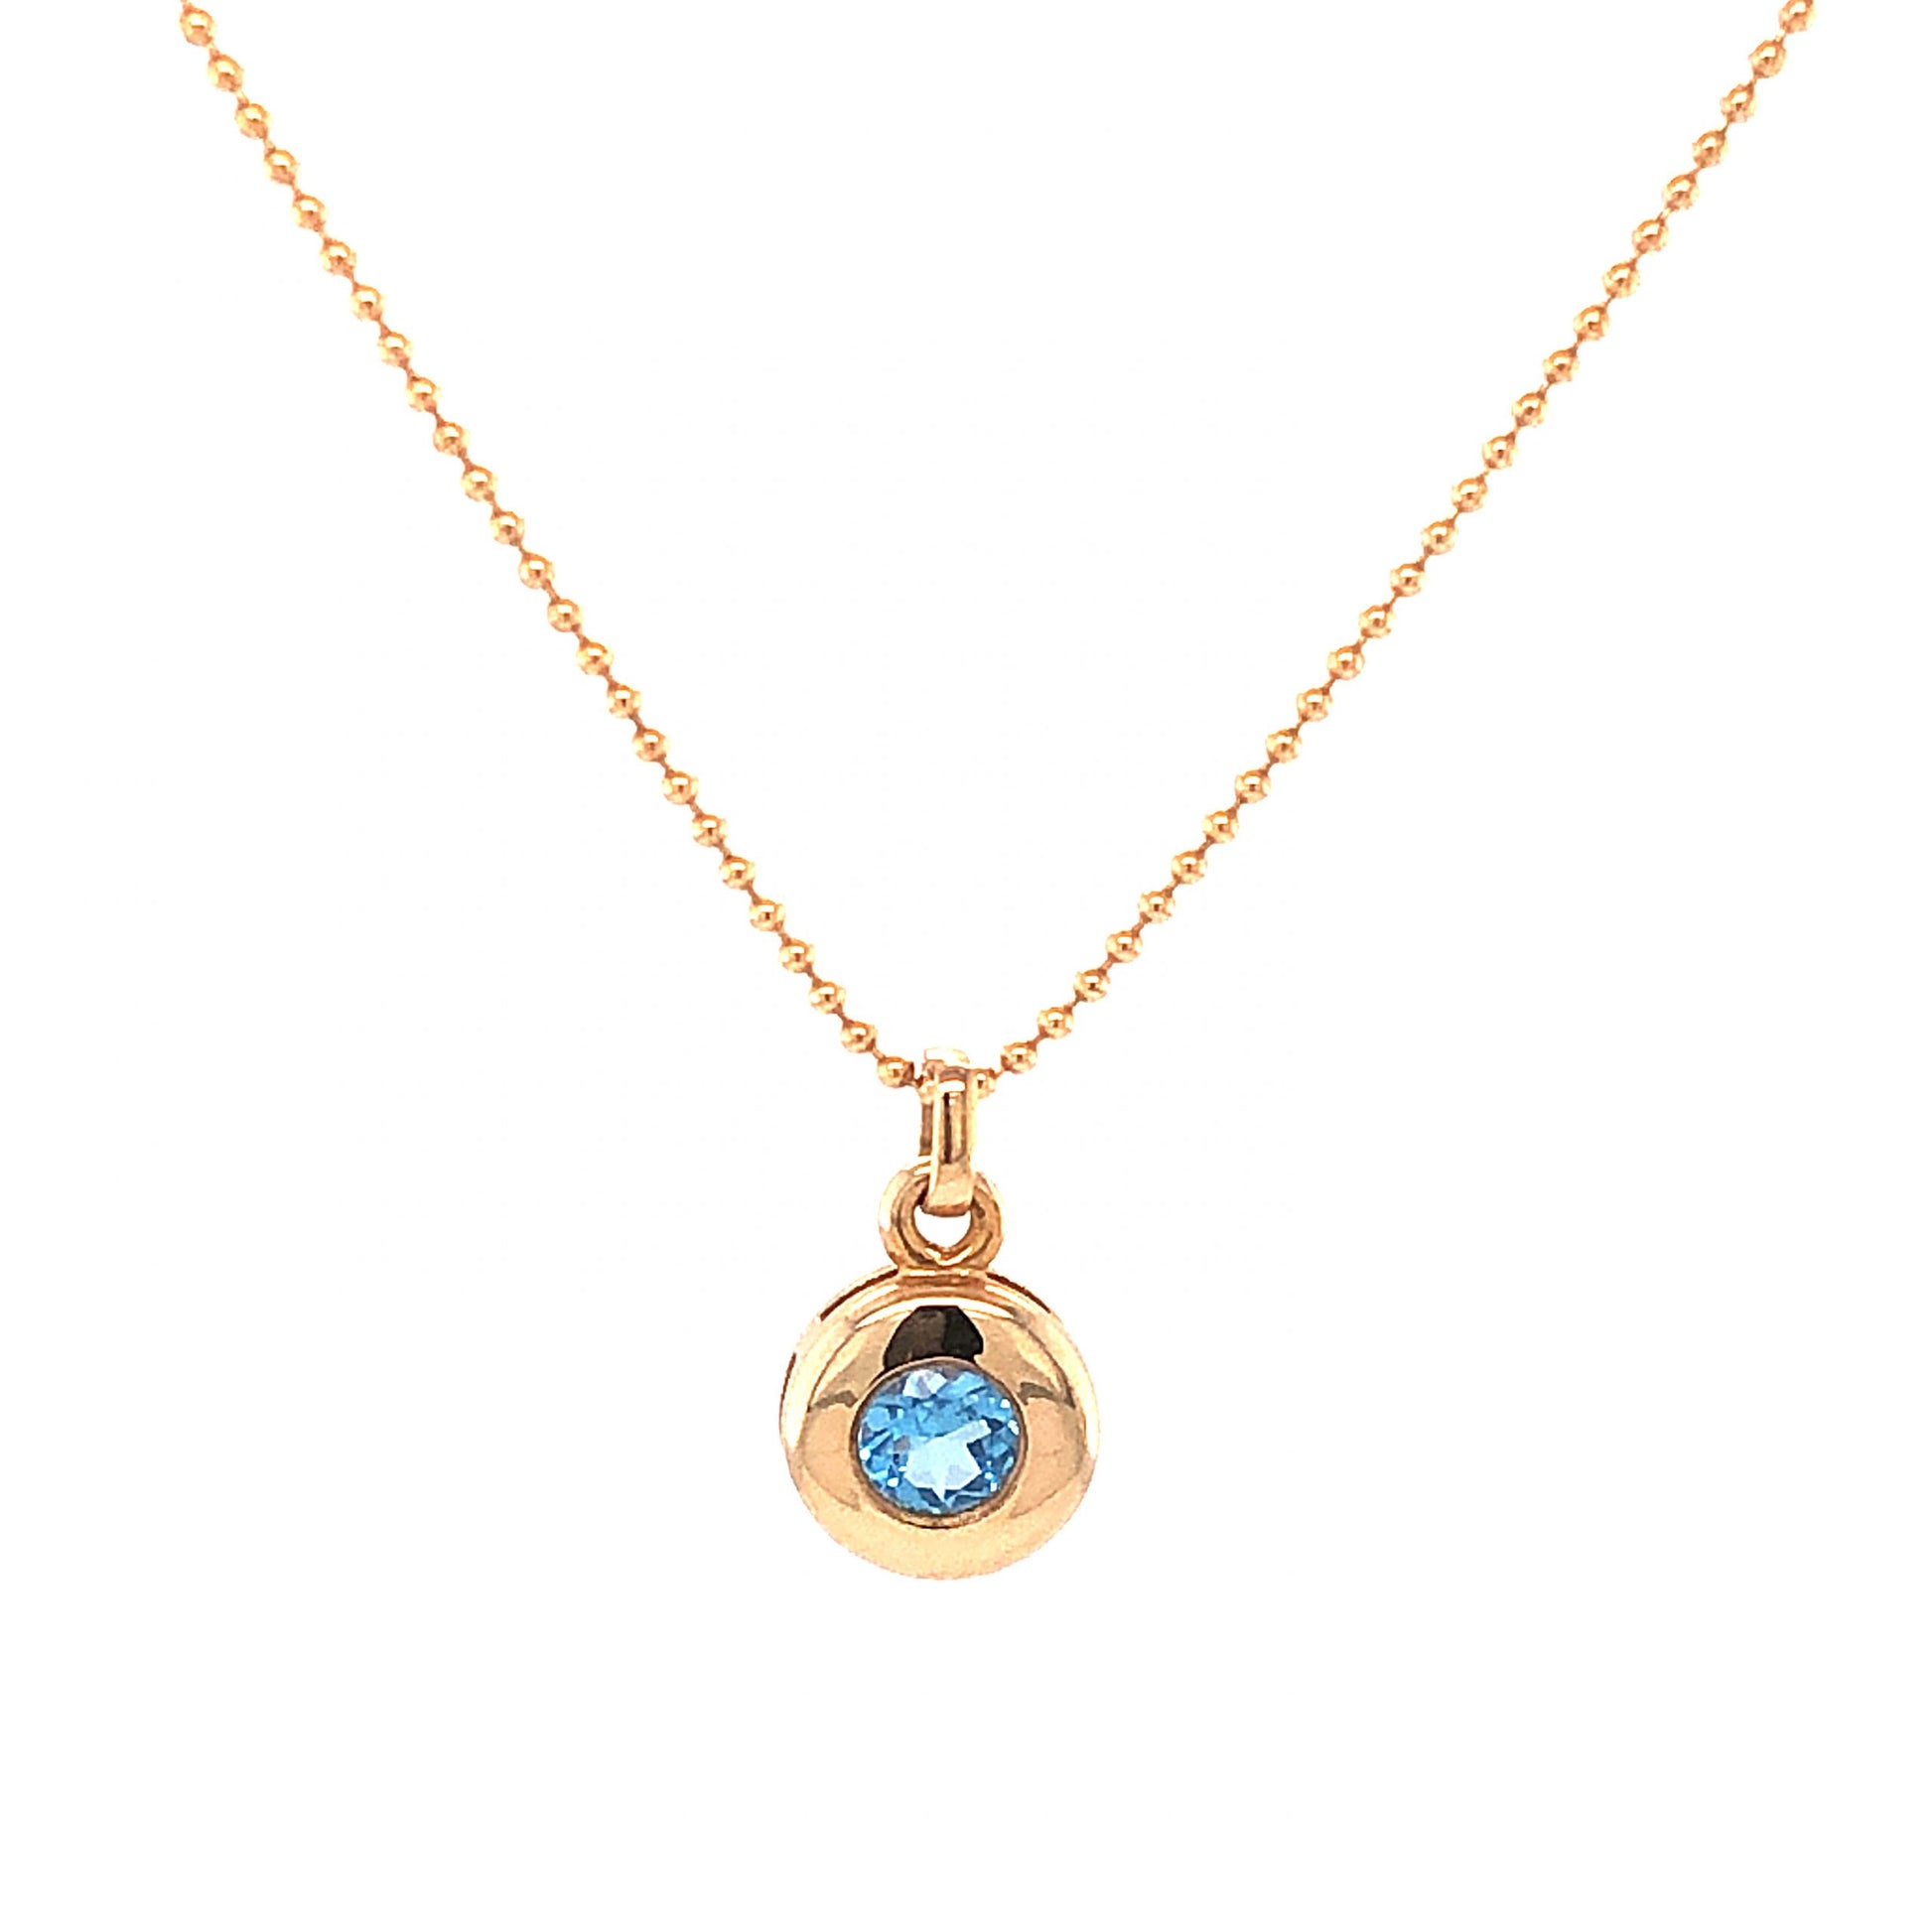 Round Blue Topaz Pendant Necklace in 14k Yellow Gold